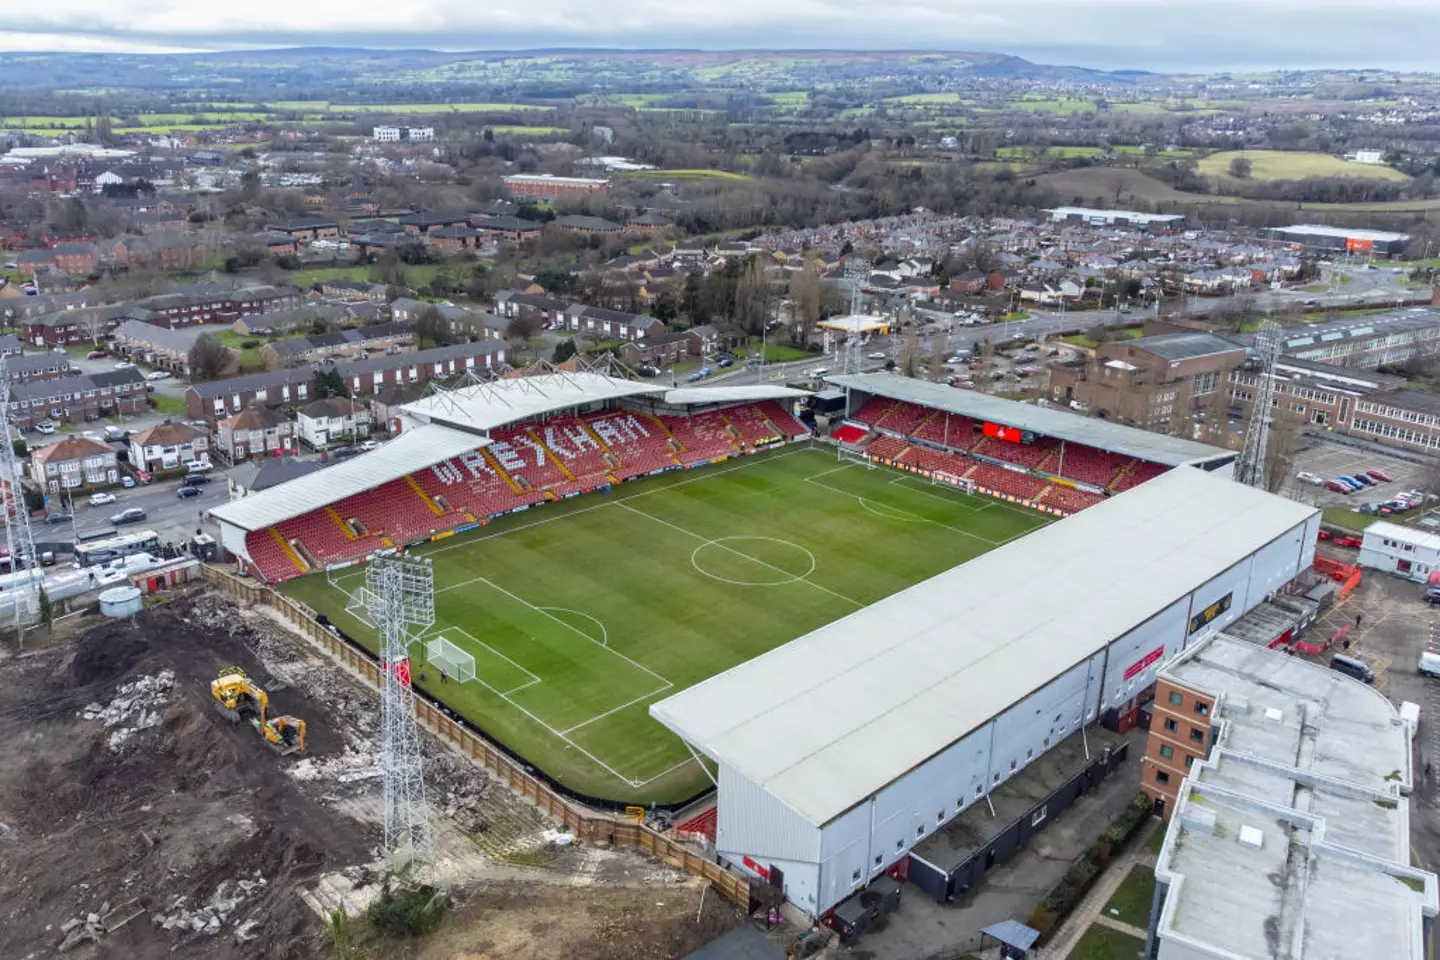 An aerial view of Wrexham's Racecourse Ground (